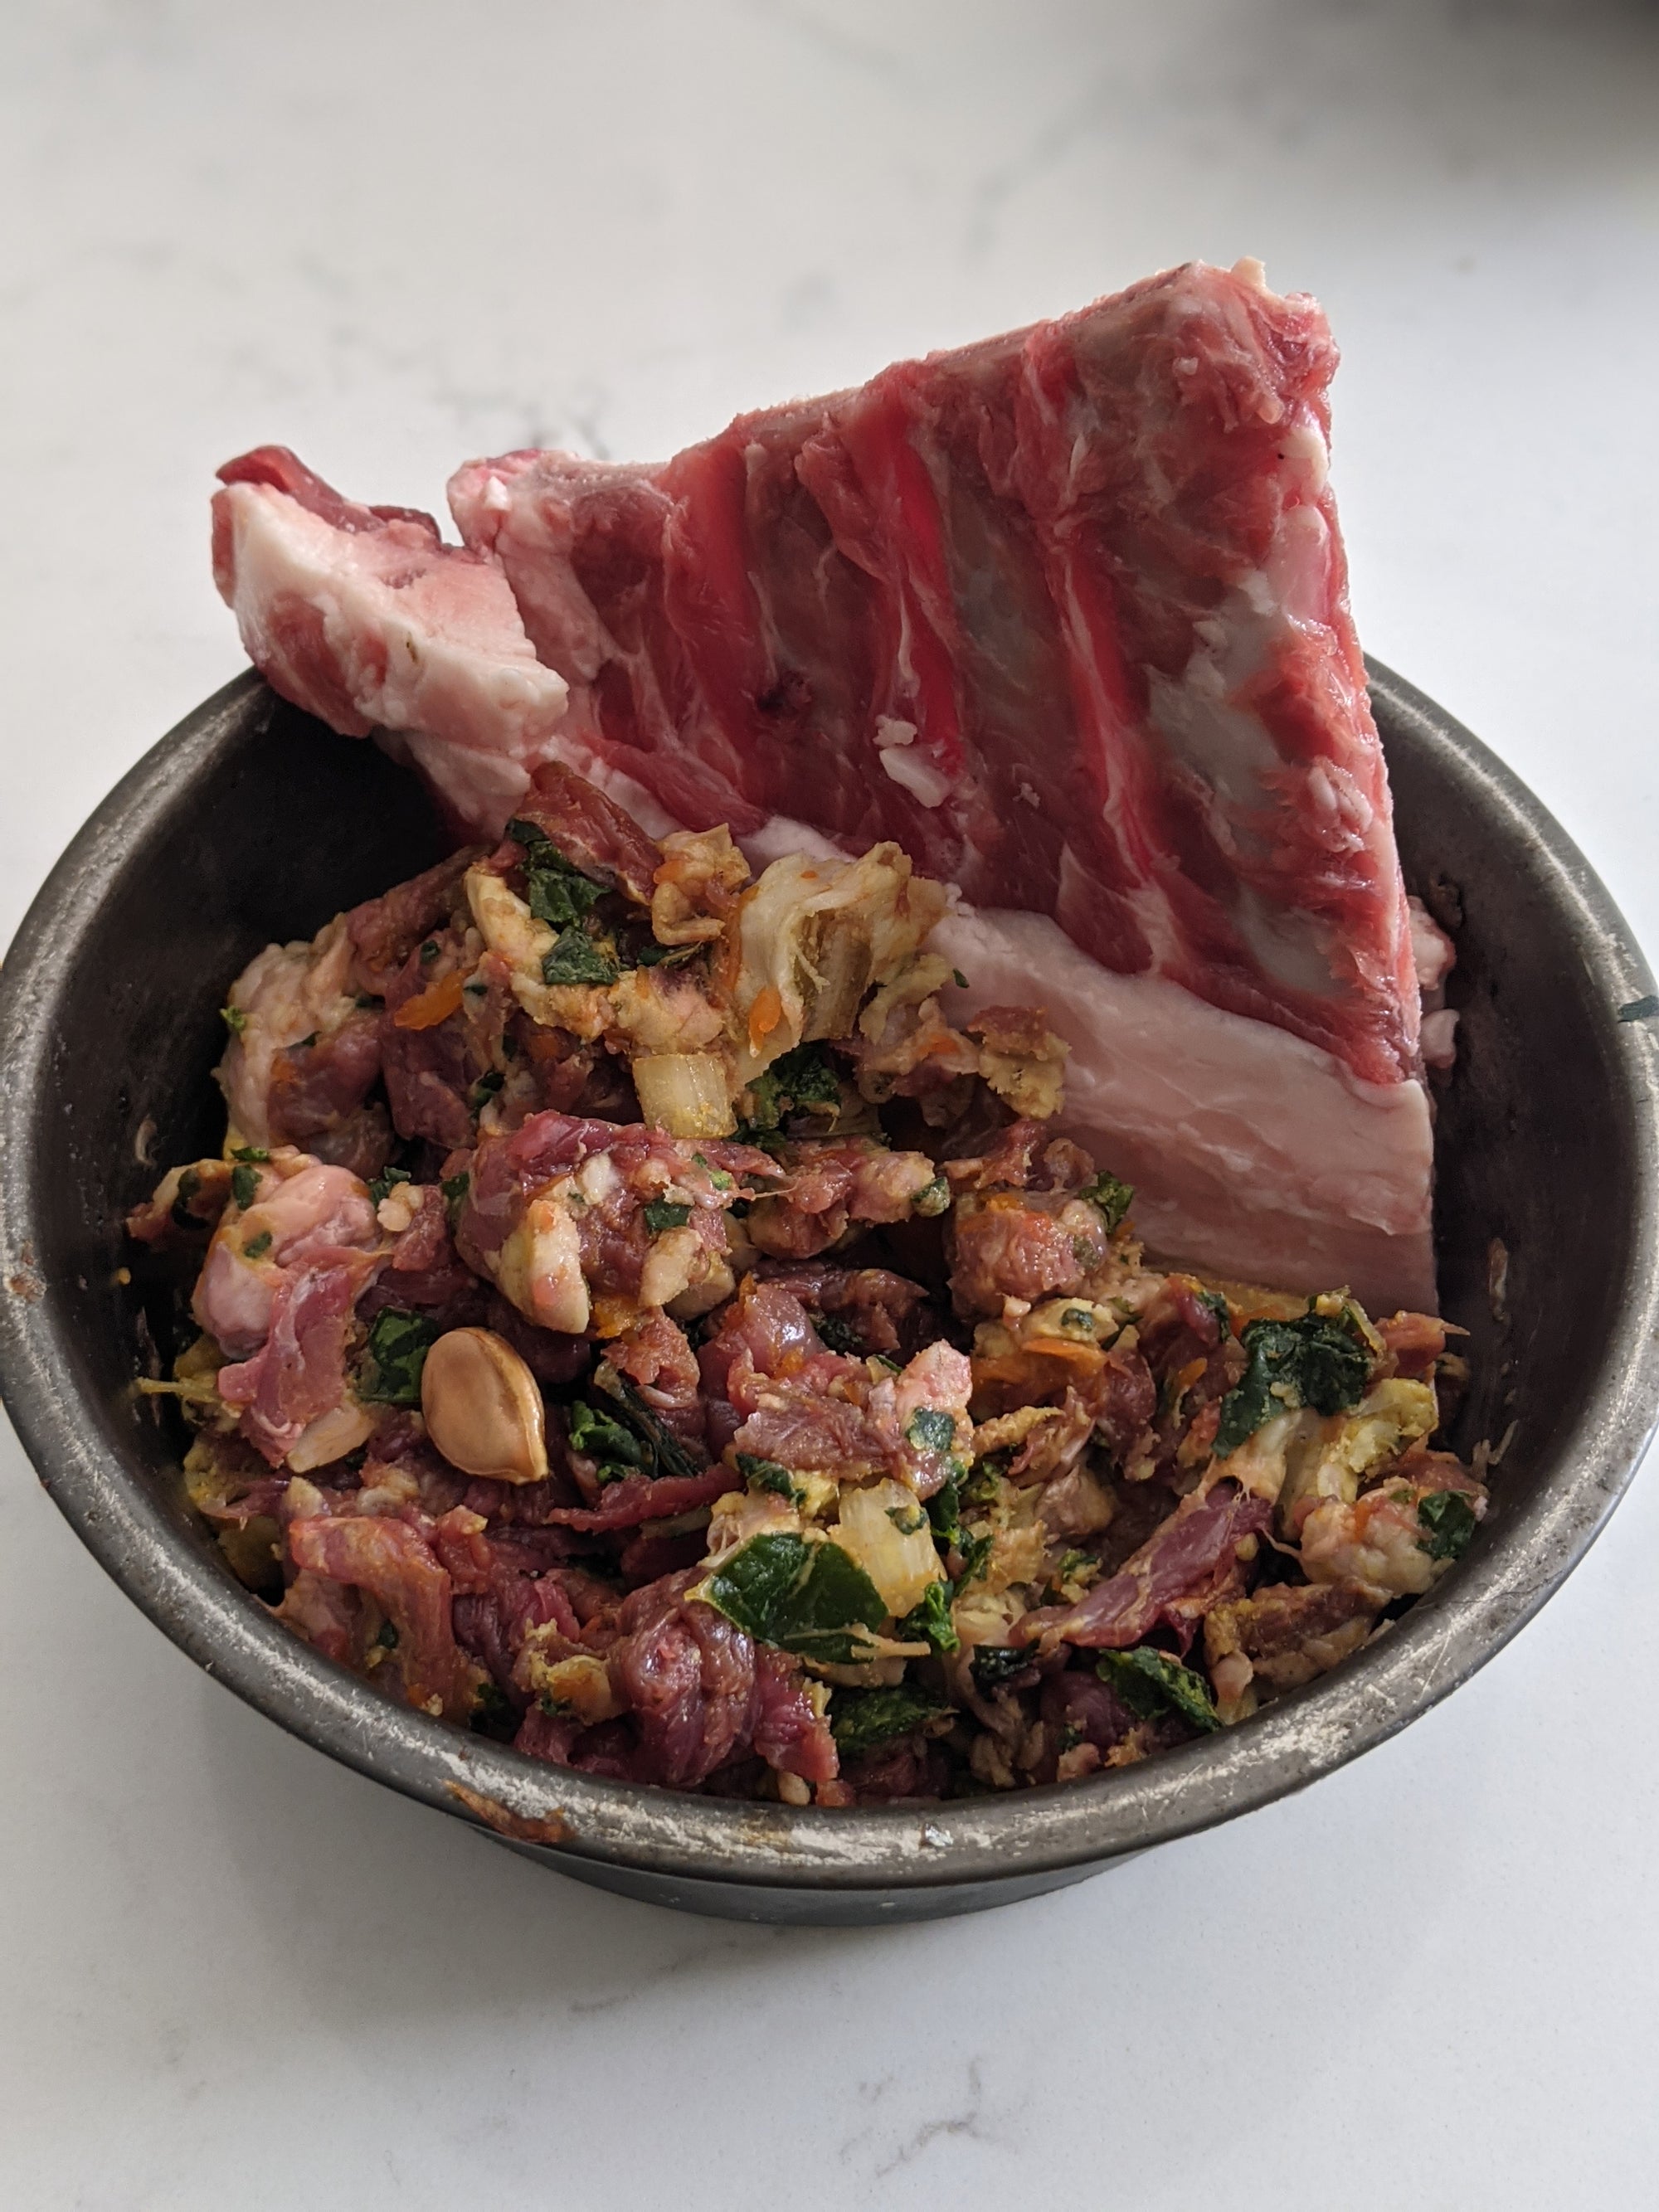 RogueRaw raw feeding meal with raw meaty bones for dogs